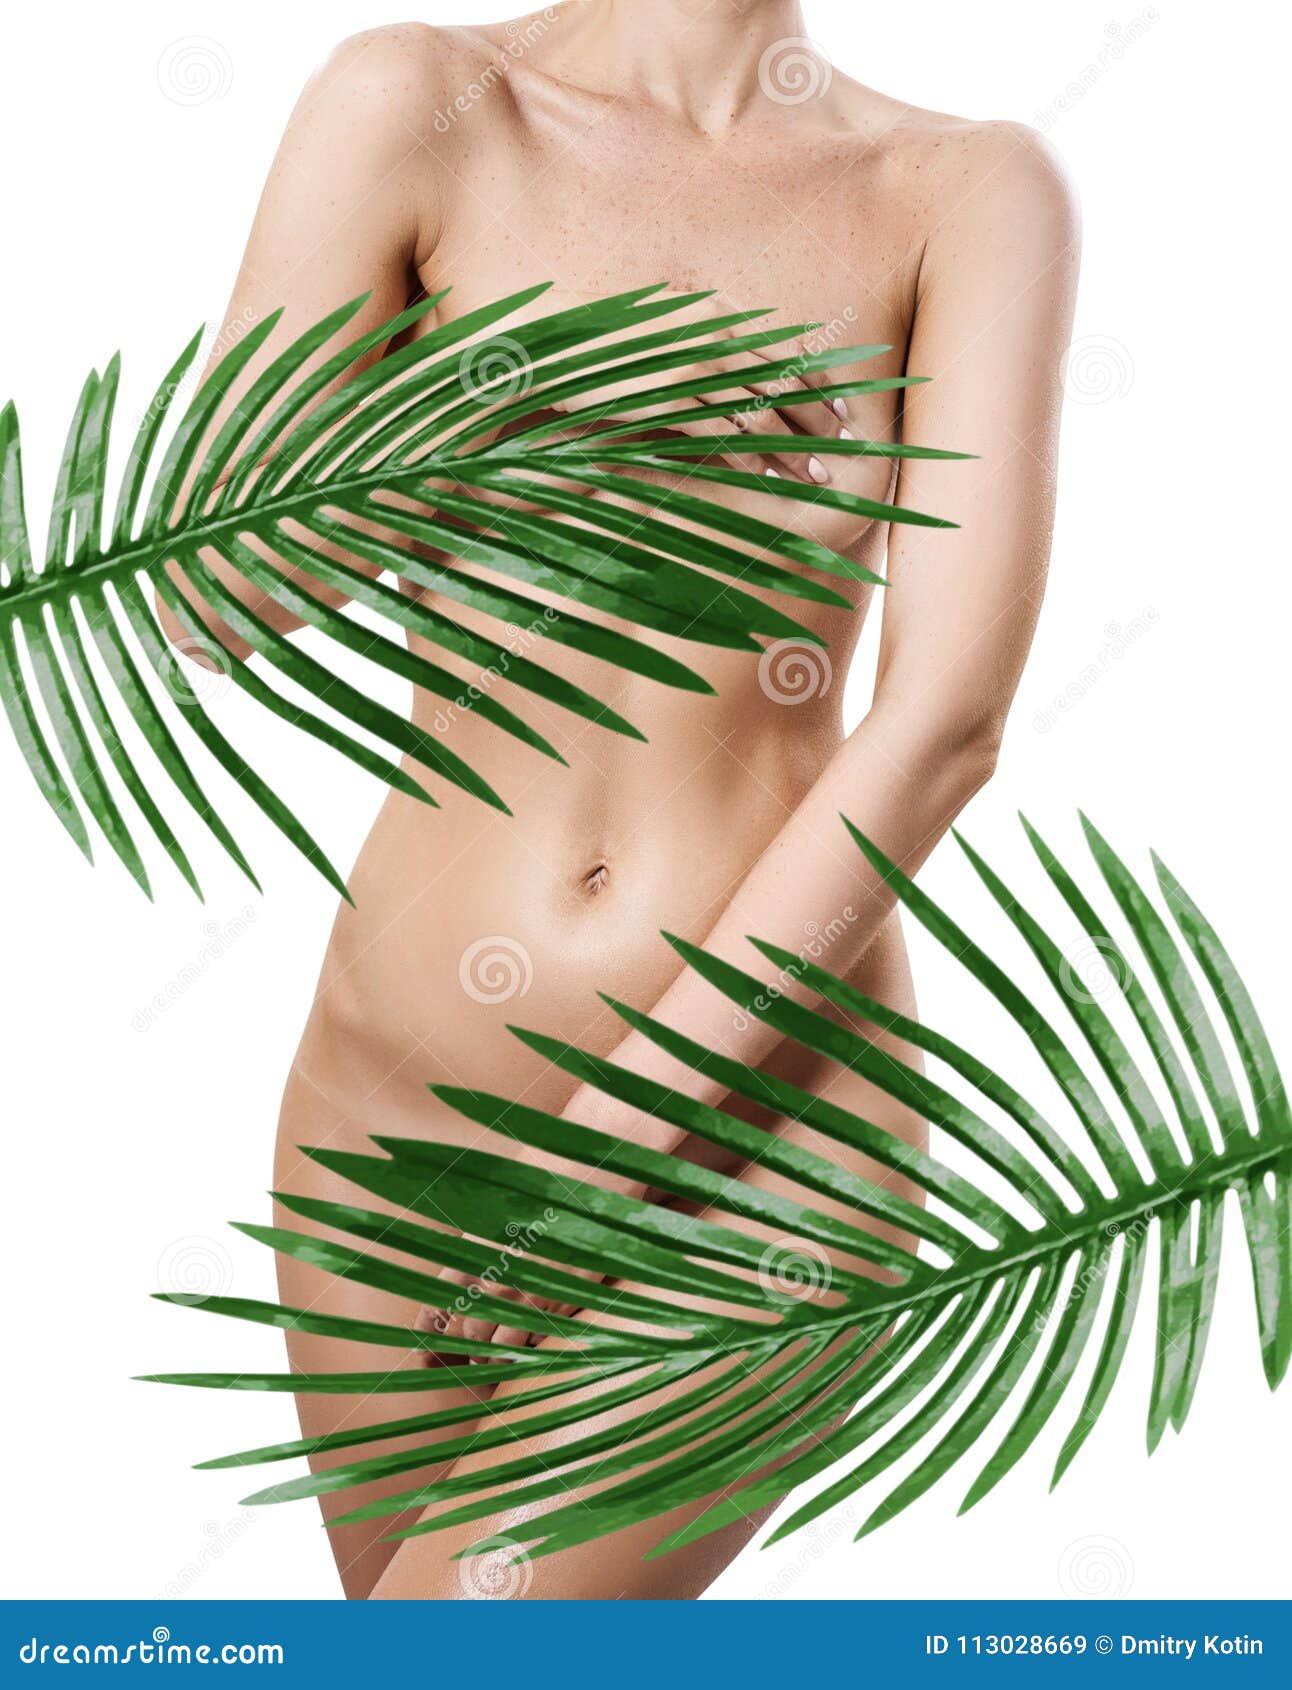 perfect-naked-female-body-covered-palm-leaves-perfect-naked-female-body-covered-palm-leaves-over-white-background-113028669.jpg